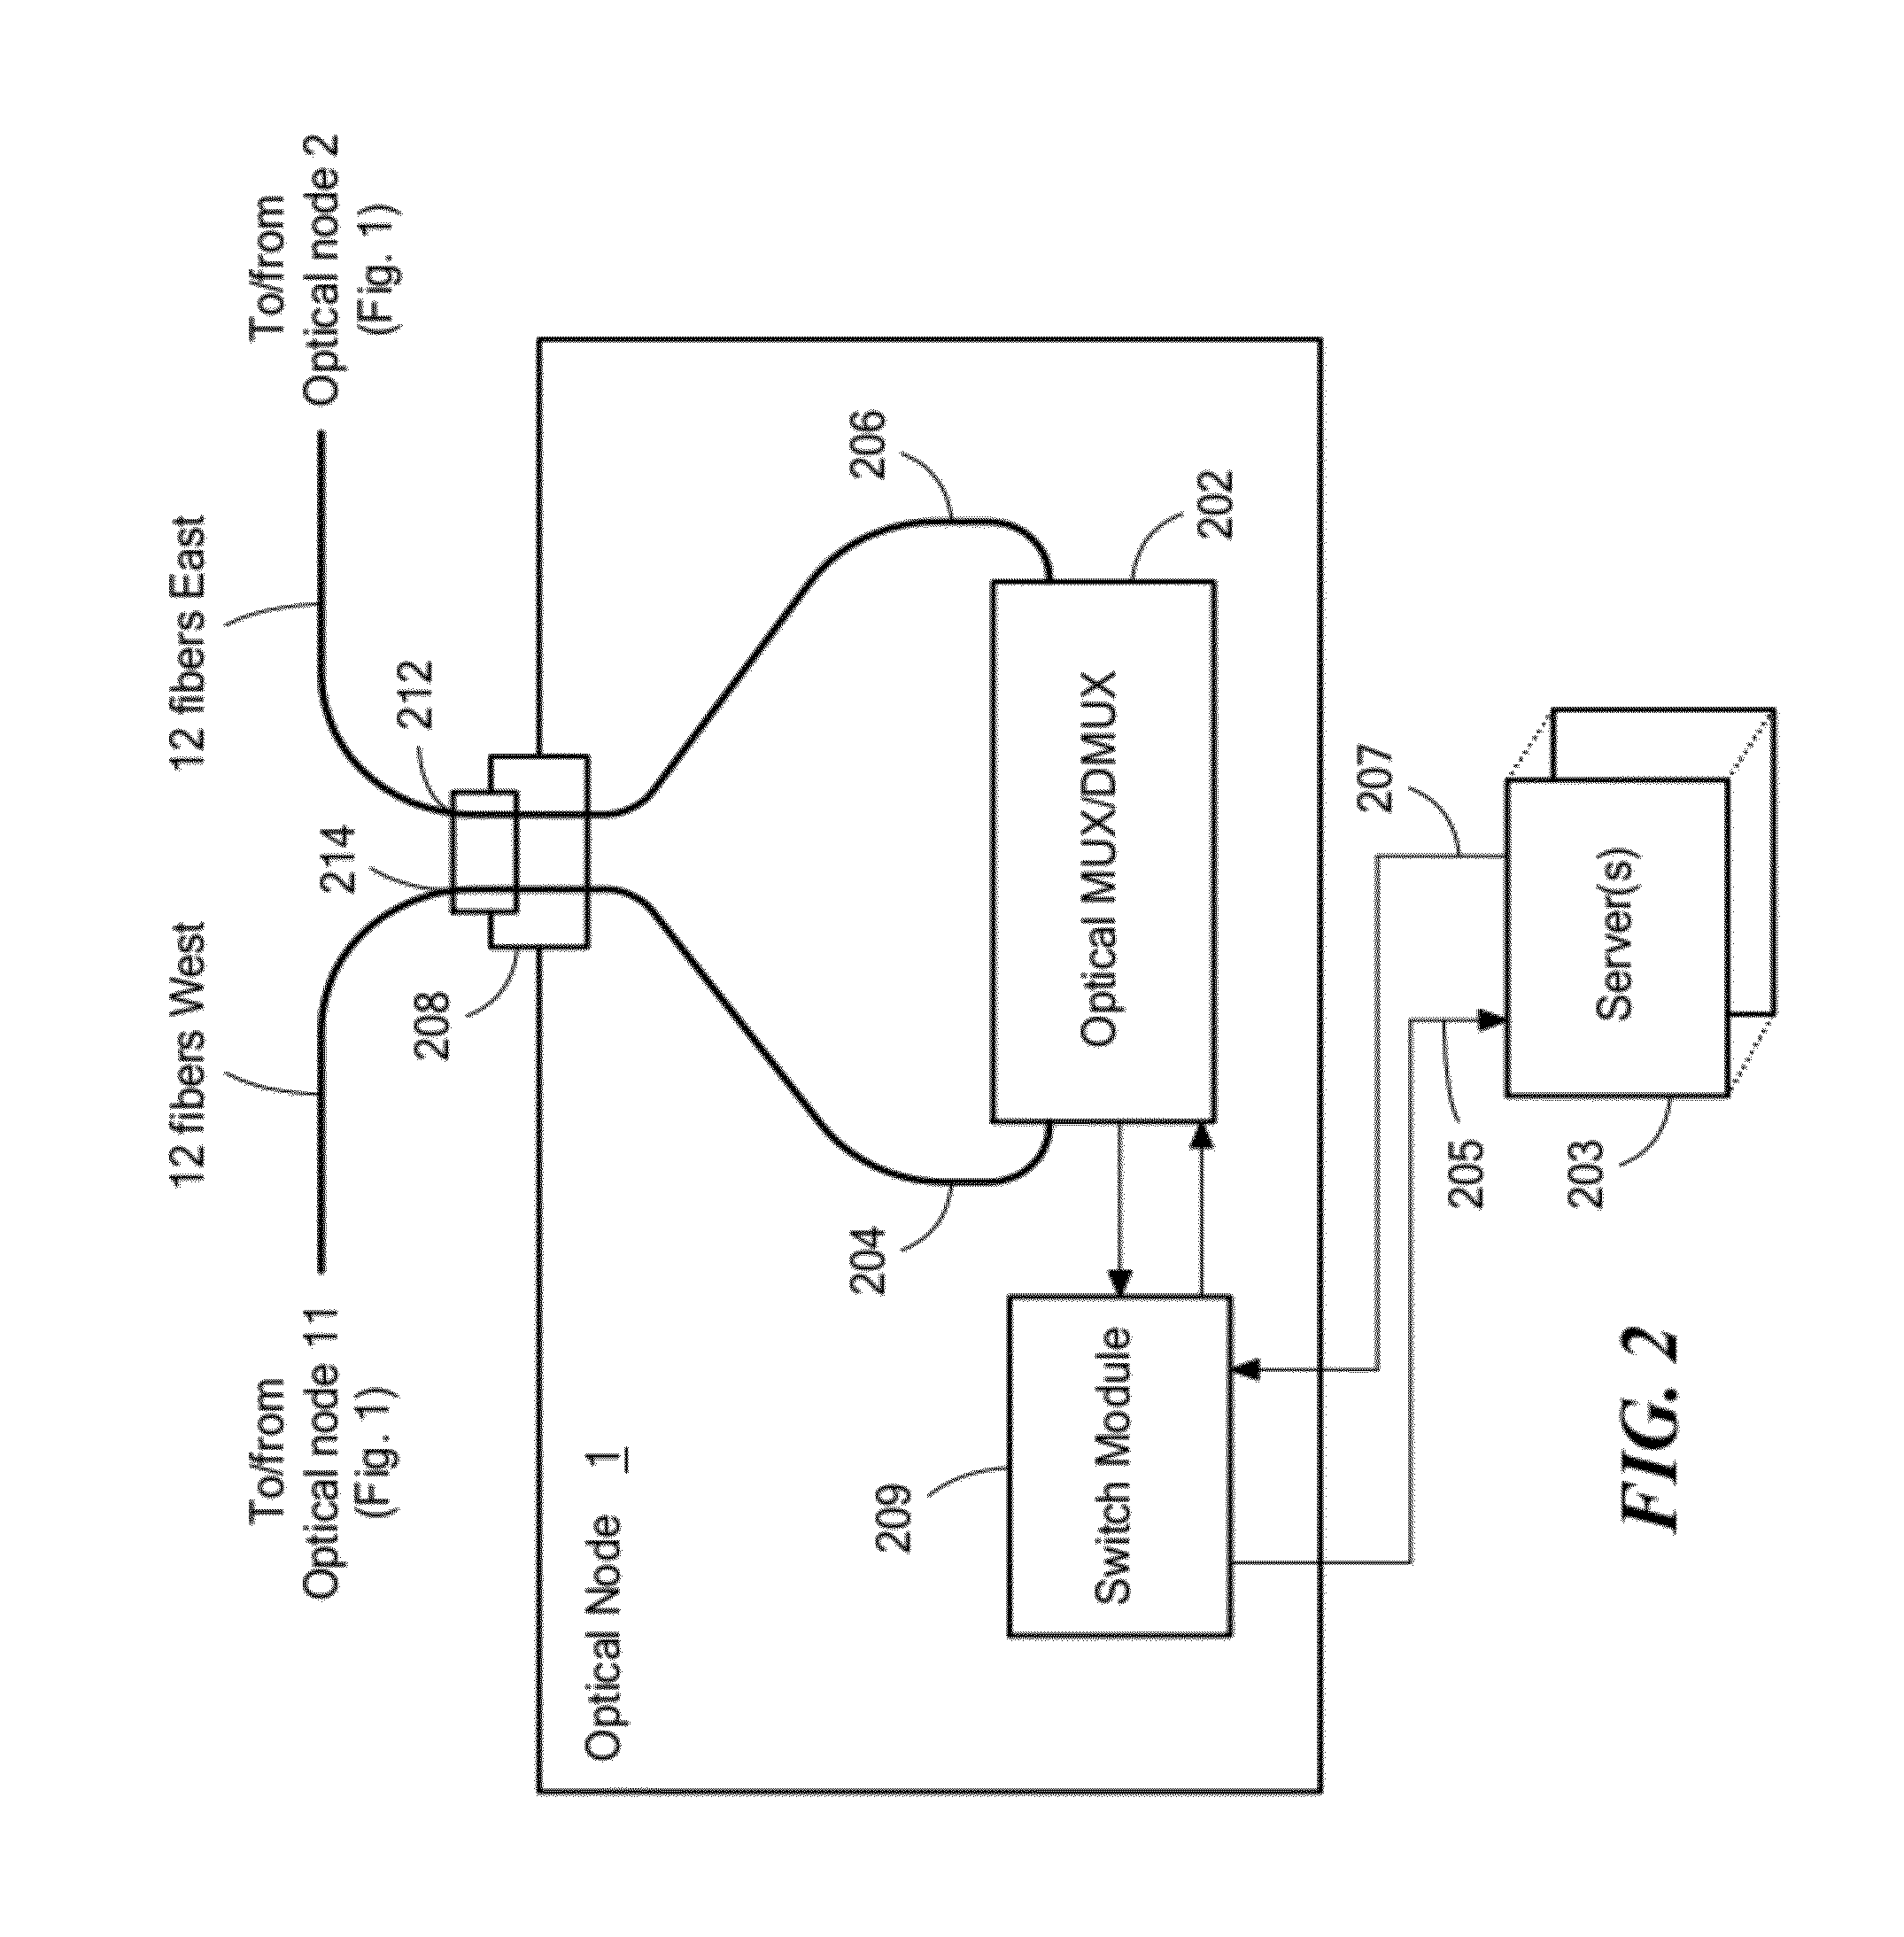 Optical architecture and channel plan employing multi-fiber configurations for data center network switching